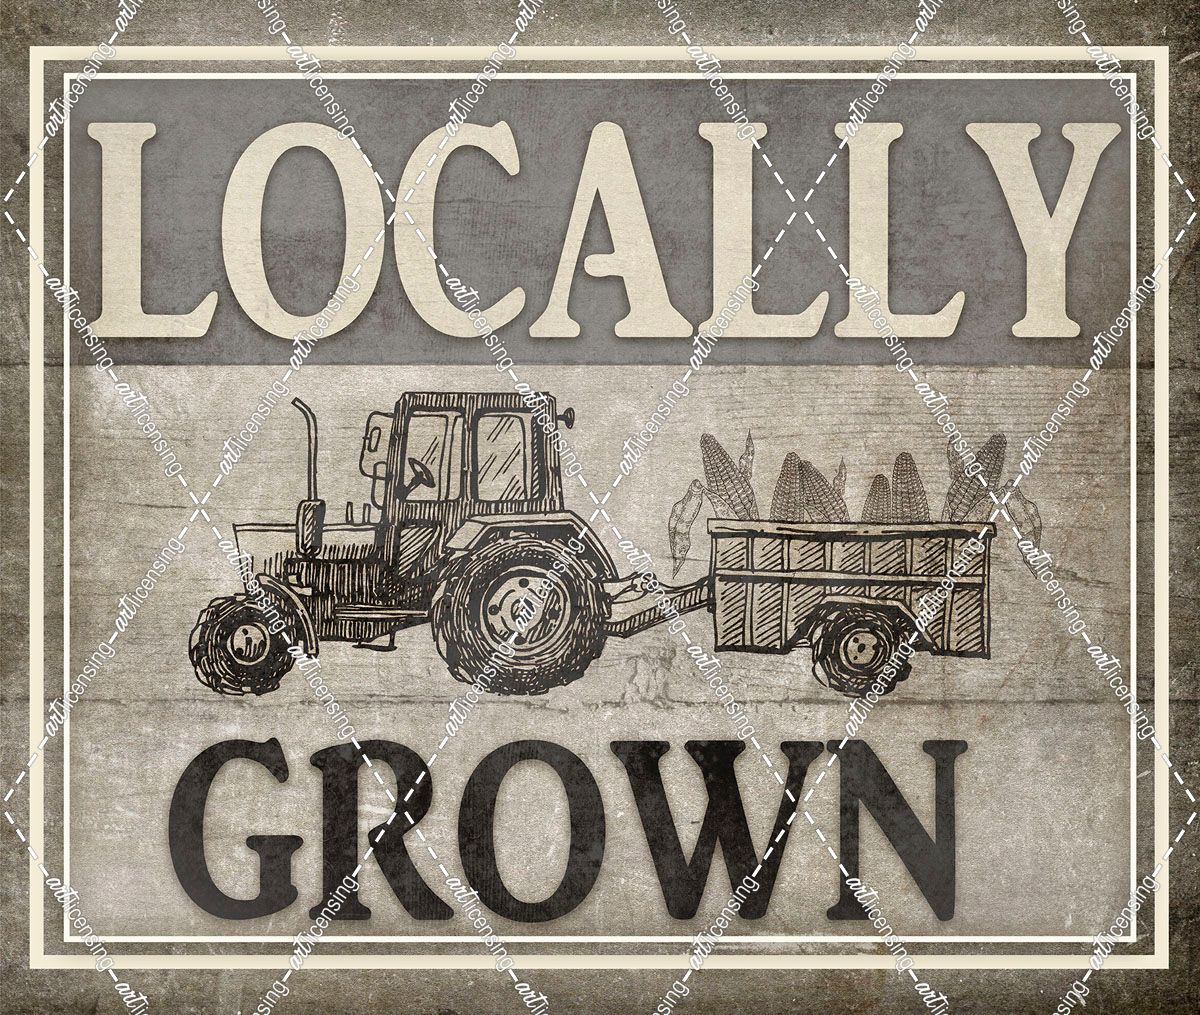 Locally Grown_TRACTOR